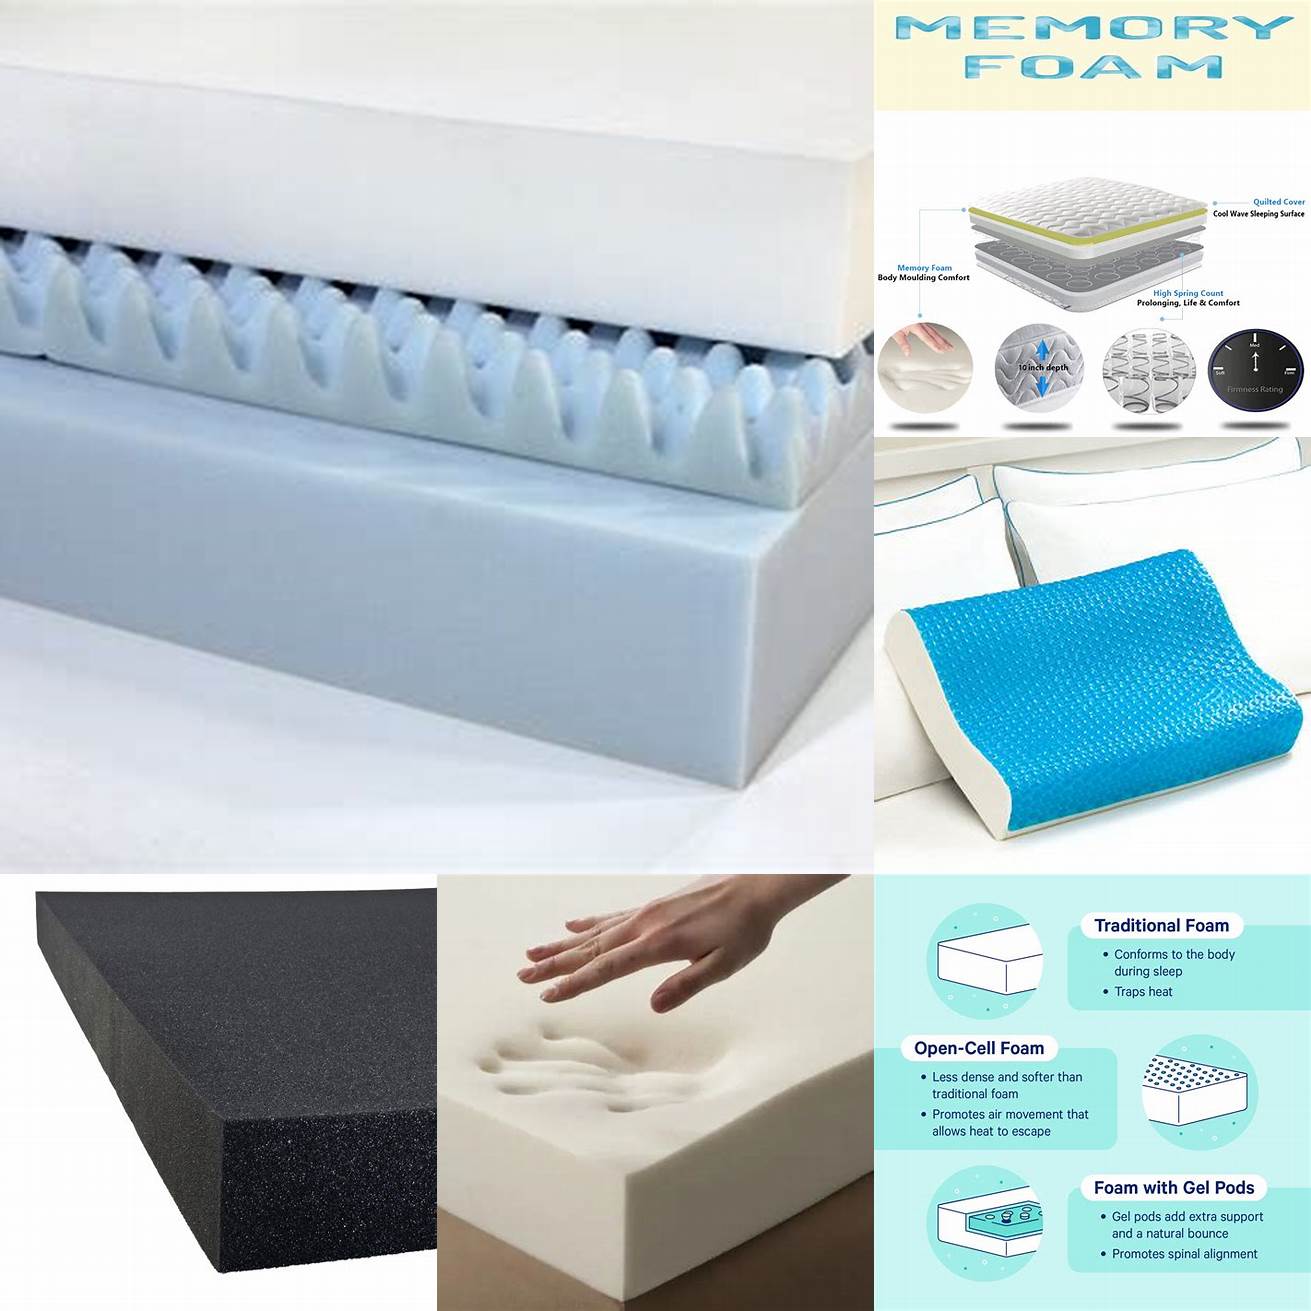 Open-cell memory foam This type of memory foam is designed to be more breathable and responsive than traditional memory foam allowing for better airflow and a more responsive feel